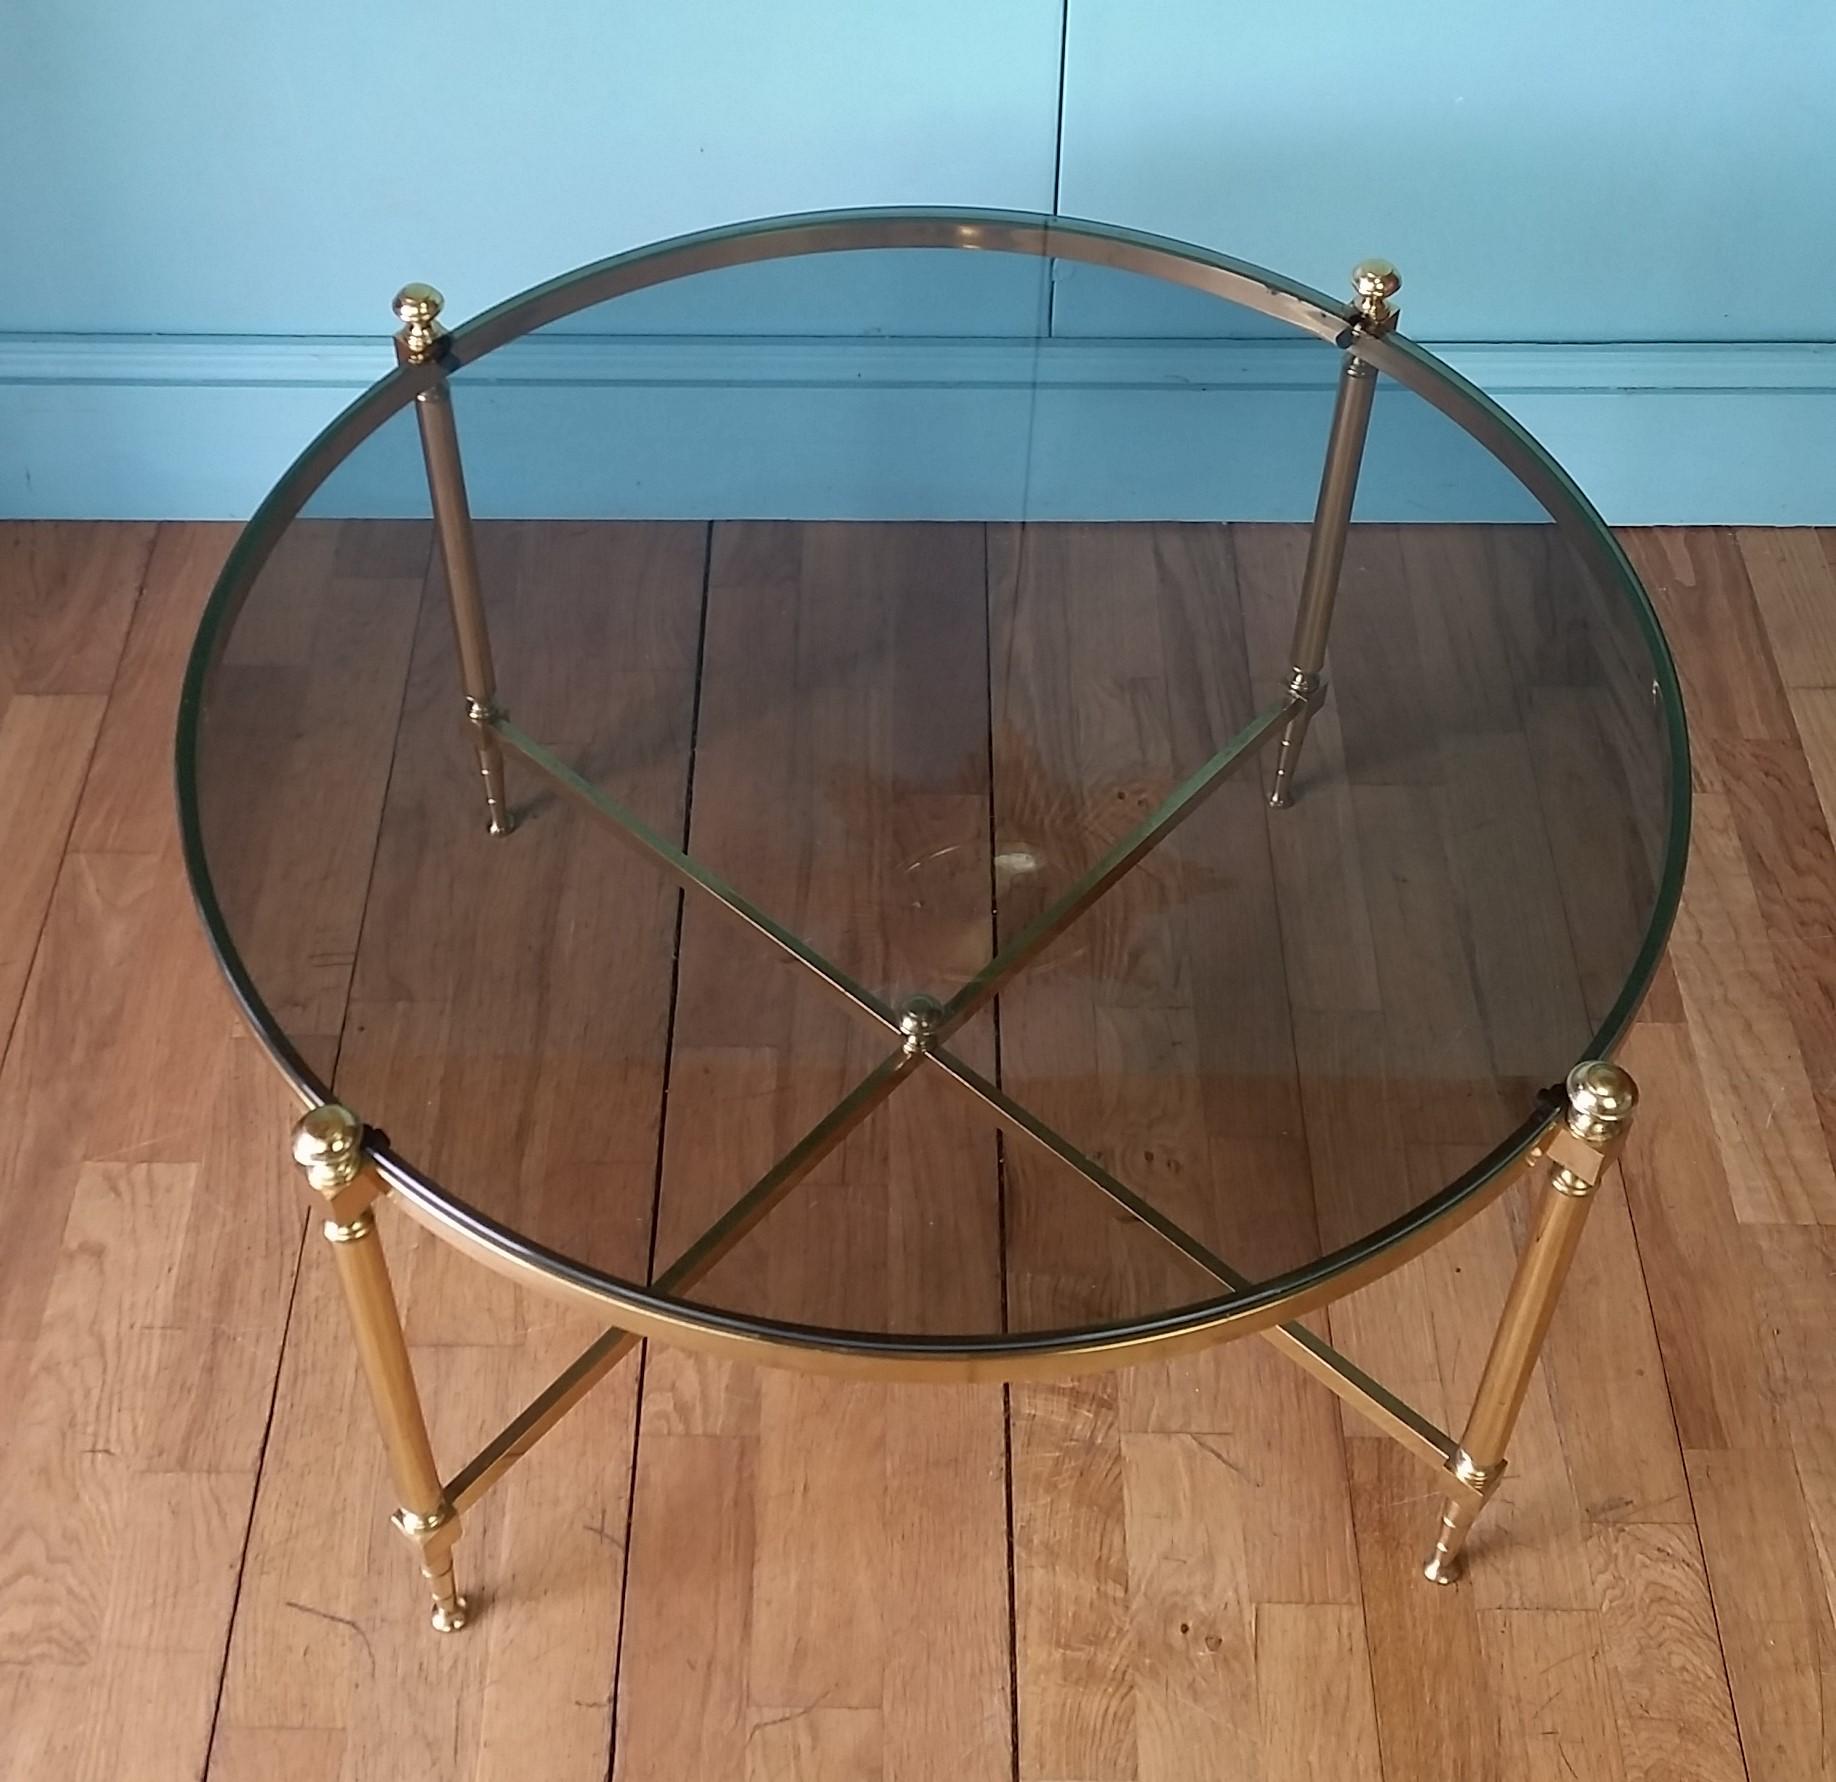 Vintage English brass coffee table circa 1960 - 1970's
Decorative brass frame with top ball finials and original tinted glass top
Lovely lower cross stretchers with central finial detail completes the glamourous style of the table.
In lovely